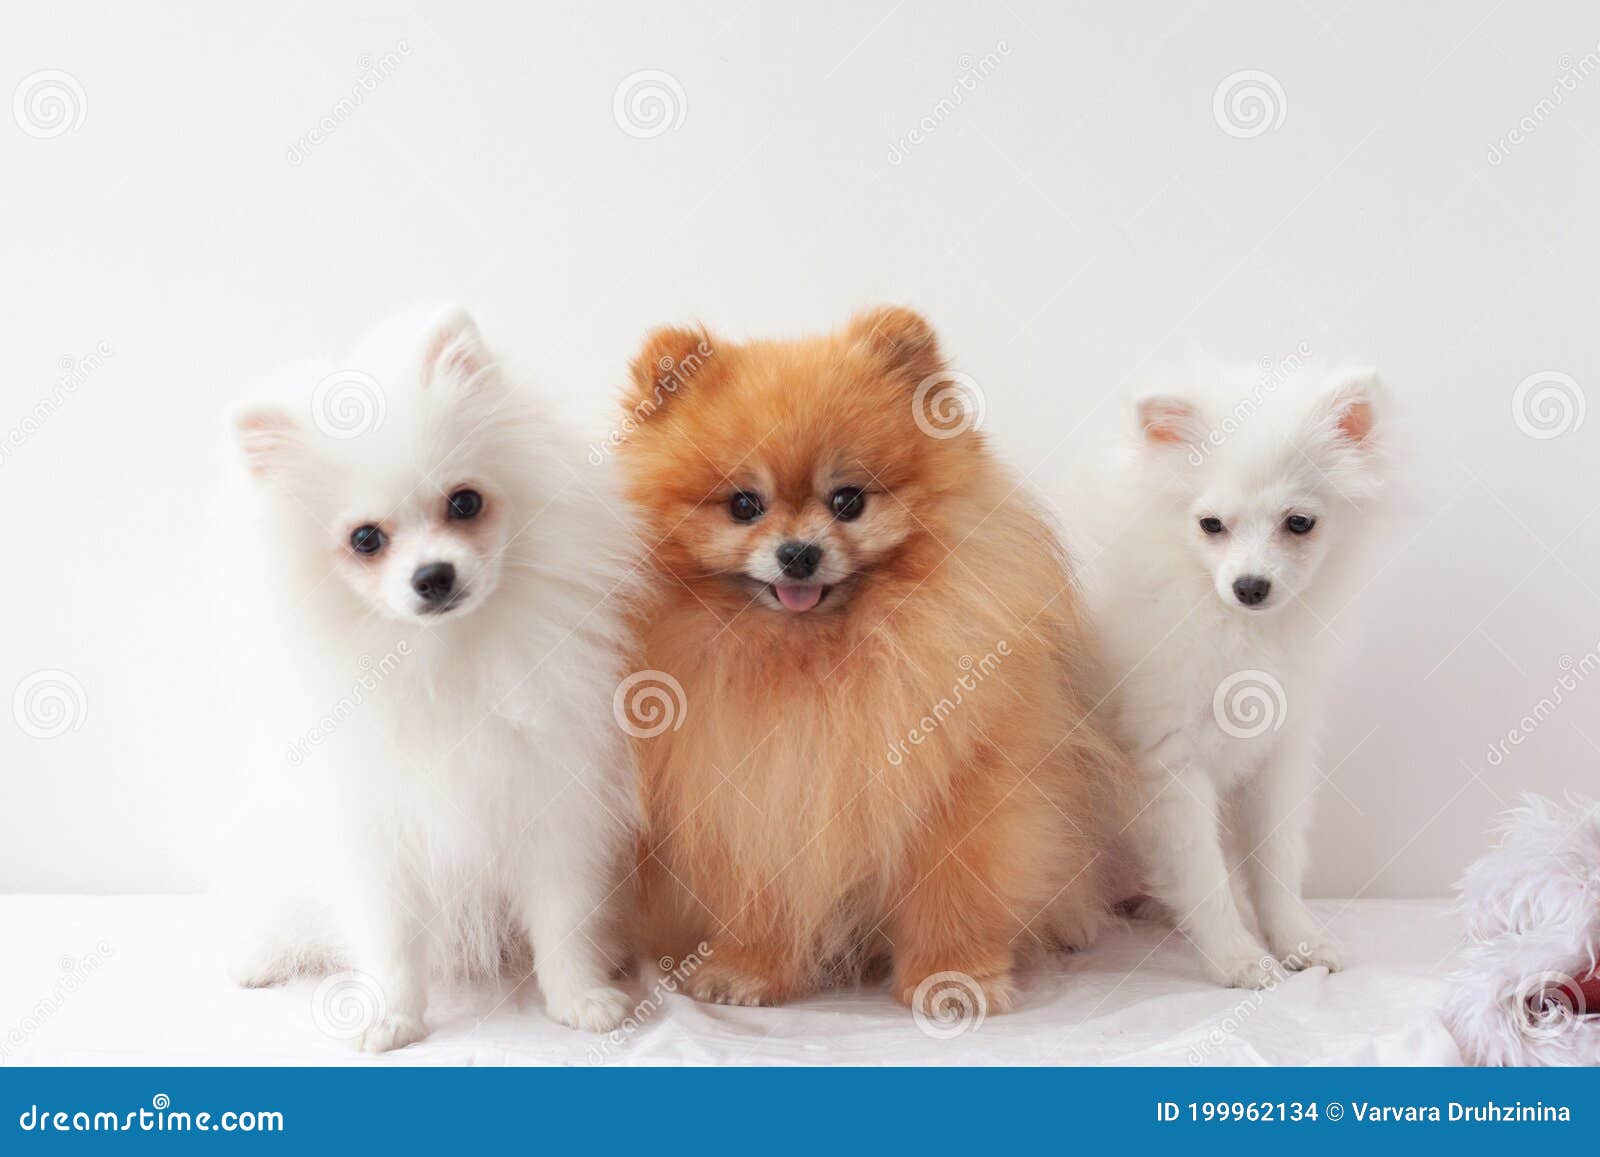 Three Small Dogs on a White Background, One Adult Pomeranian Fluffy, Orange  Color and Two White Pomeranian Puppies Stock Photo - Image of notes, puppy:  199962134